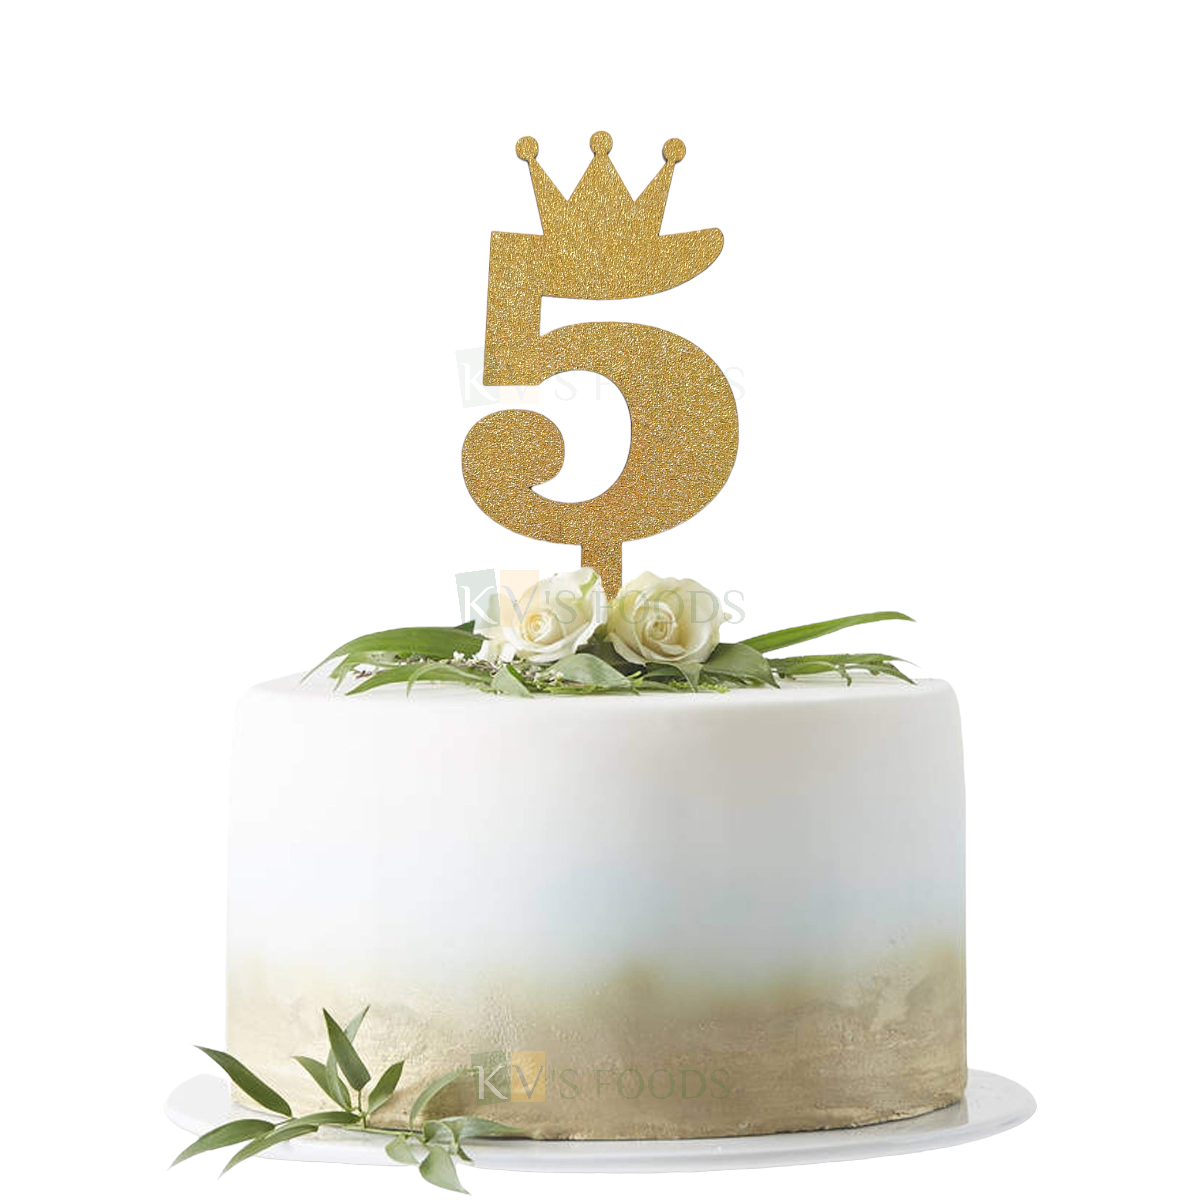 1PC Golden Shiny Glitter MDF 5 Number With Crown Cake Topper, Happy Birthday Theme, 5th Birthday Cake Topper, Five Number Tiara Theme Cake Glitter Insert 5 Years Old Birthday DIY Cupcake Decorations